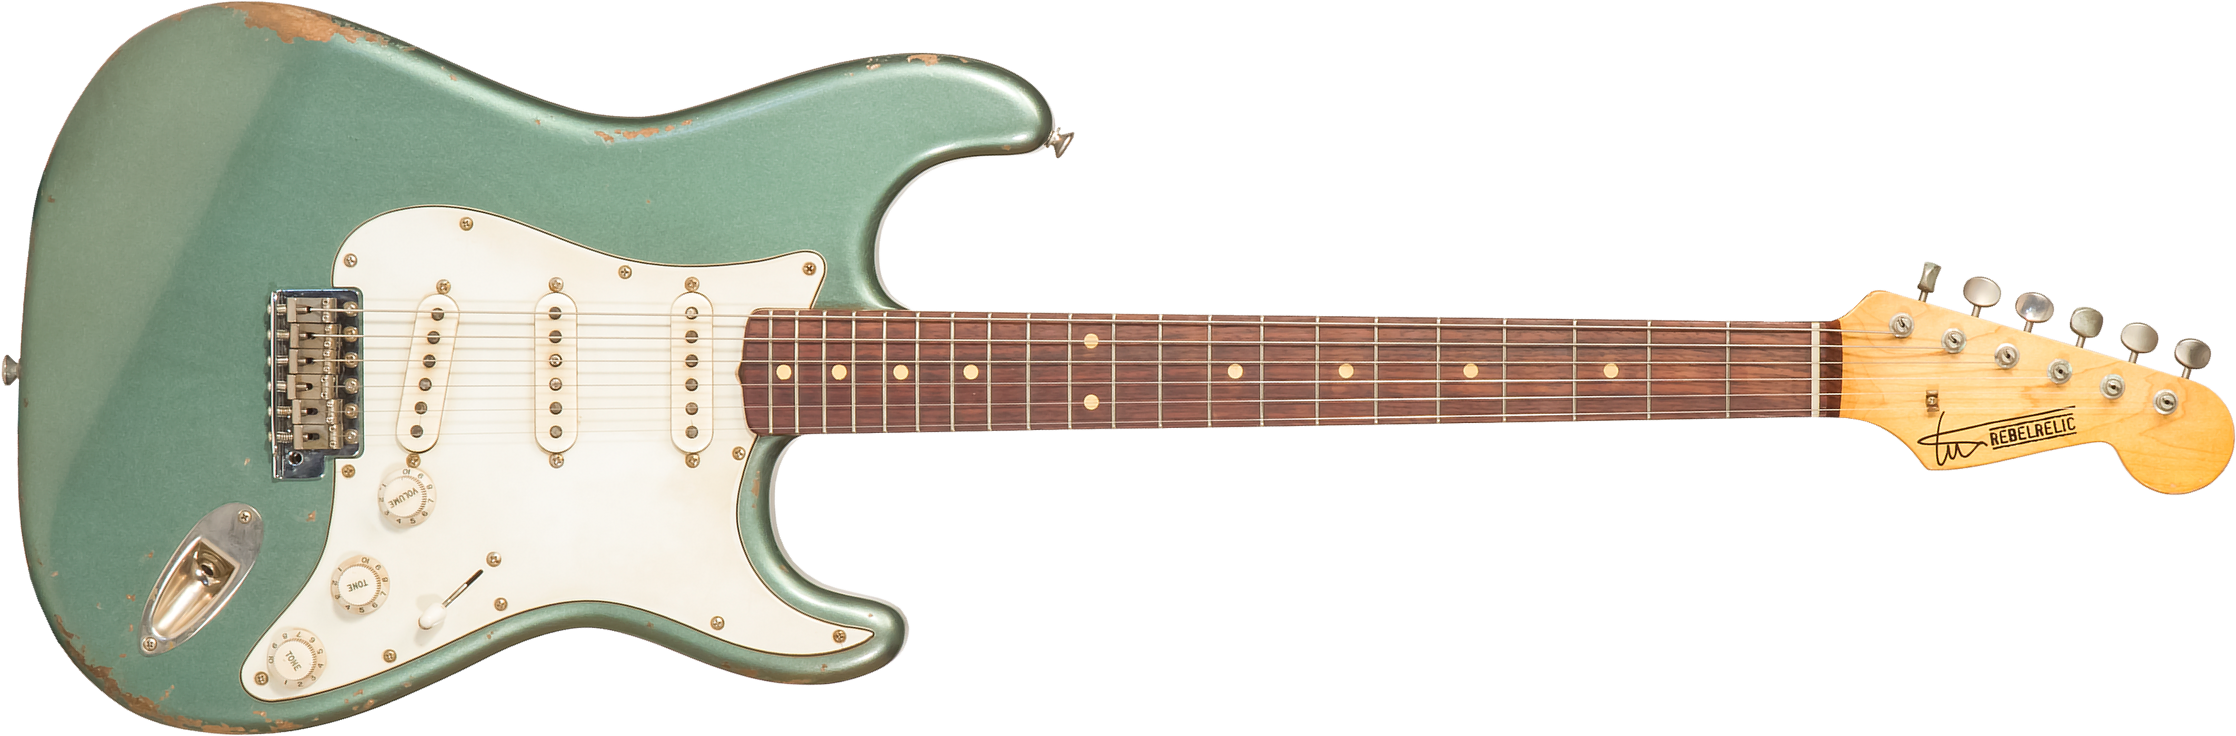 Rebelrelic S-series 62 3s Trem Rw #230203 - Light Aged Sherwood Forest Green - E-Gitarre in Str-Form - Main picture